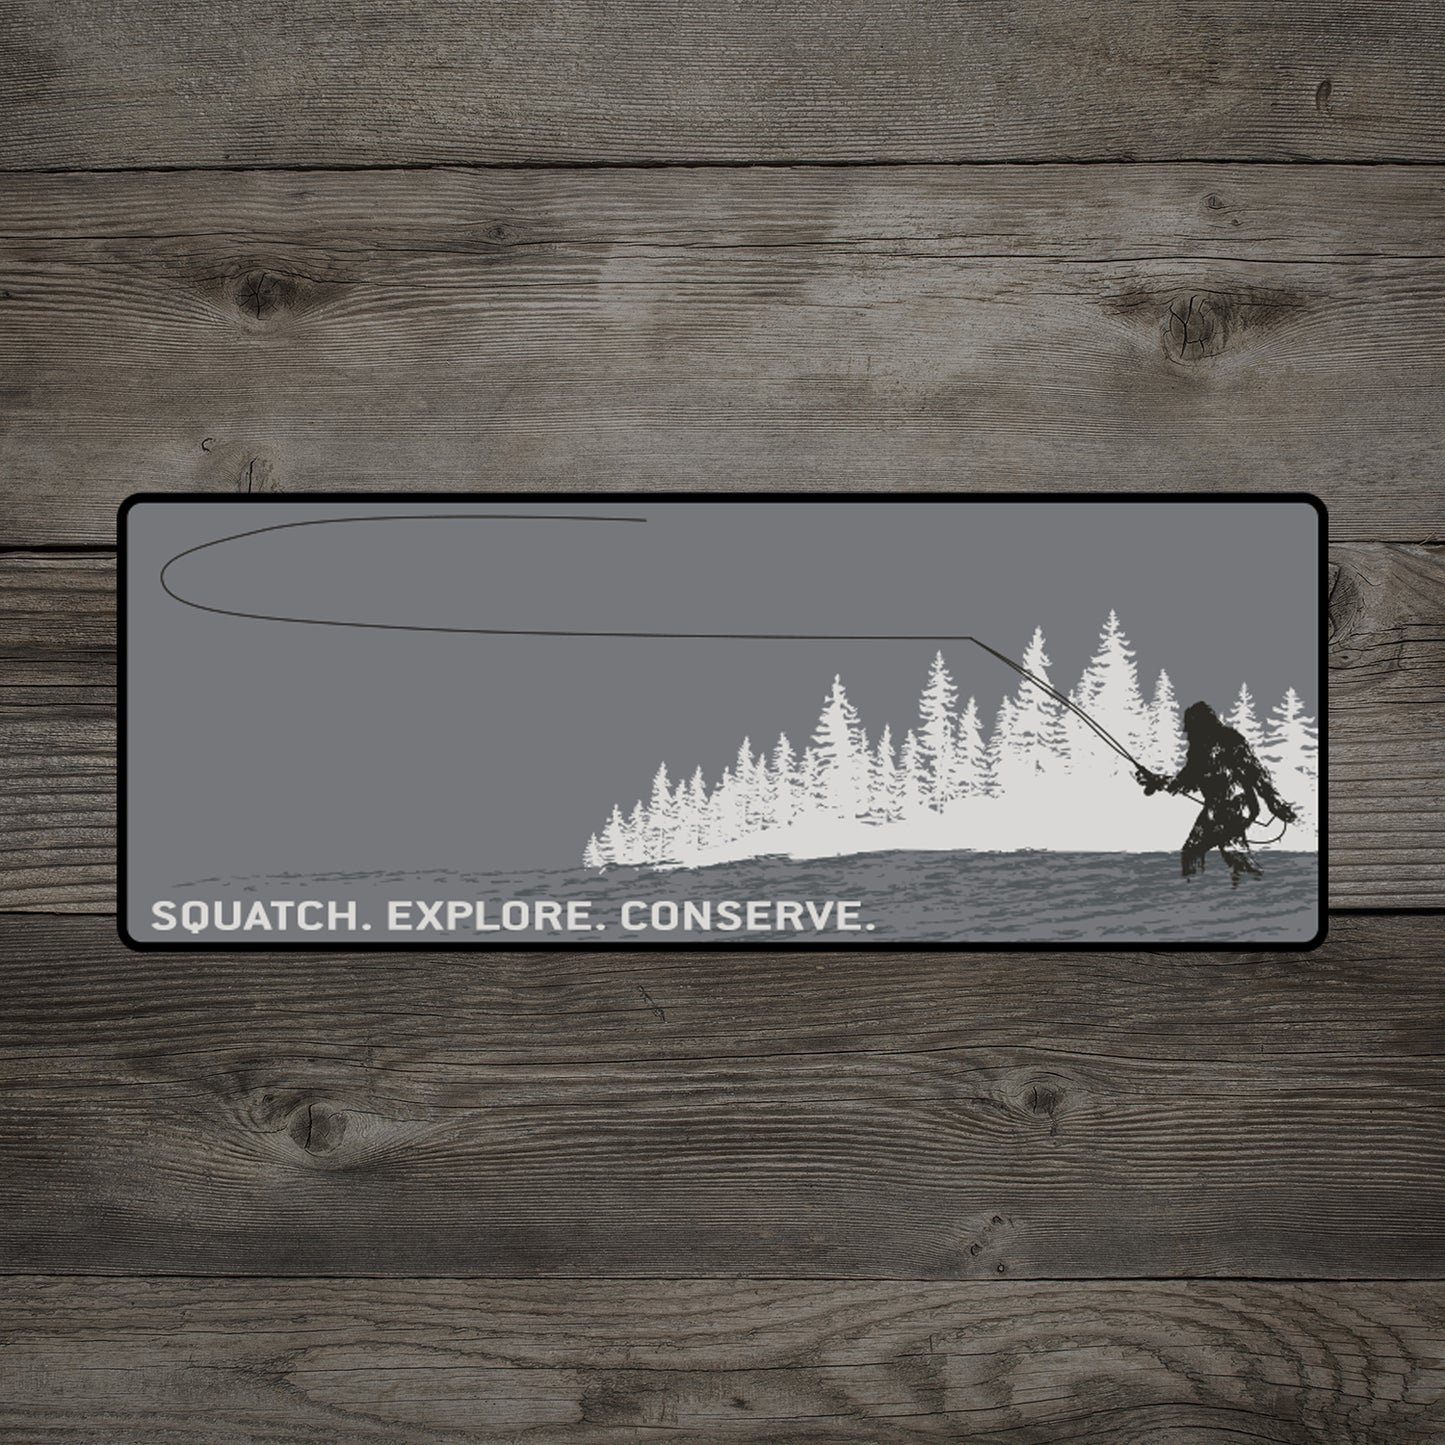 A wood background has a sticker on it that features a sasquatch casting a fly rod while in the water in front of pine trees with the words squatch explore conserve underneath